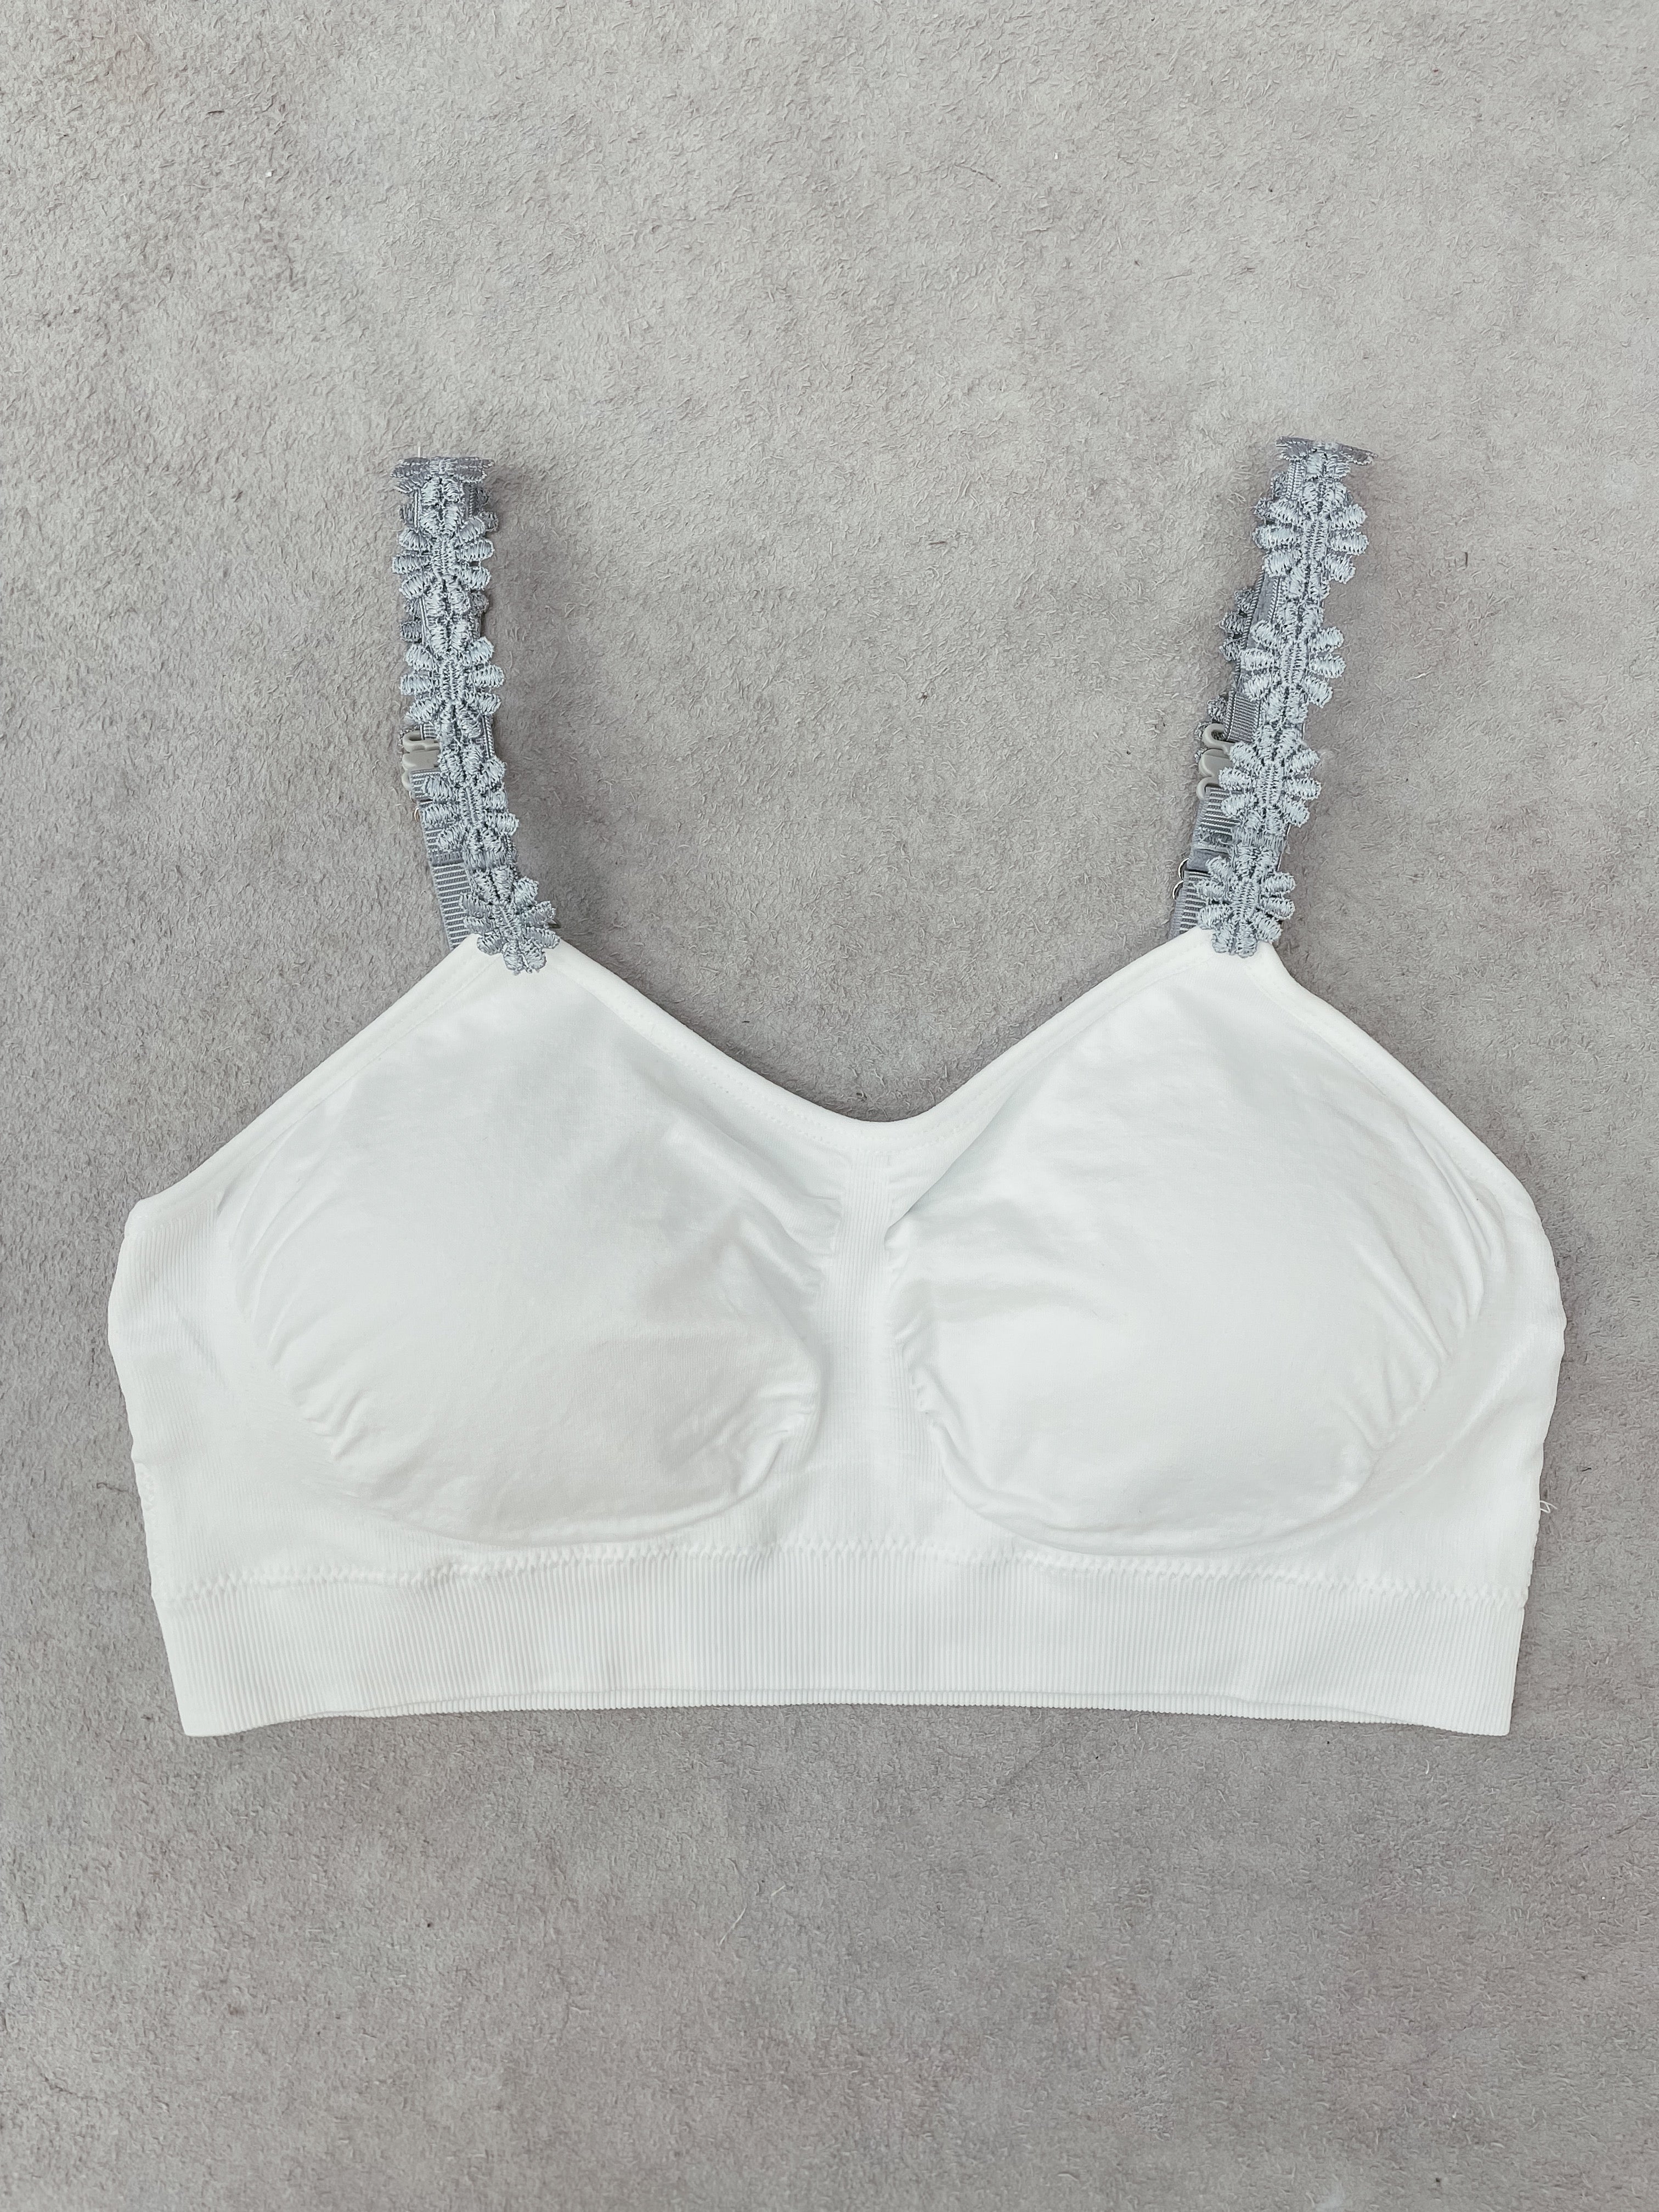 Strap It Bra White With Gray Embroidered Flower